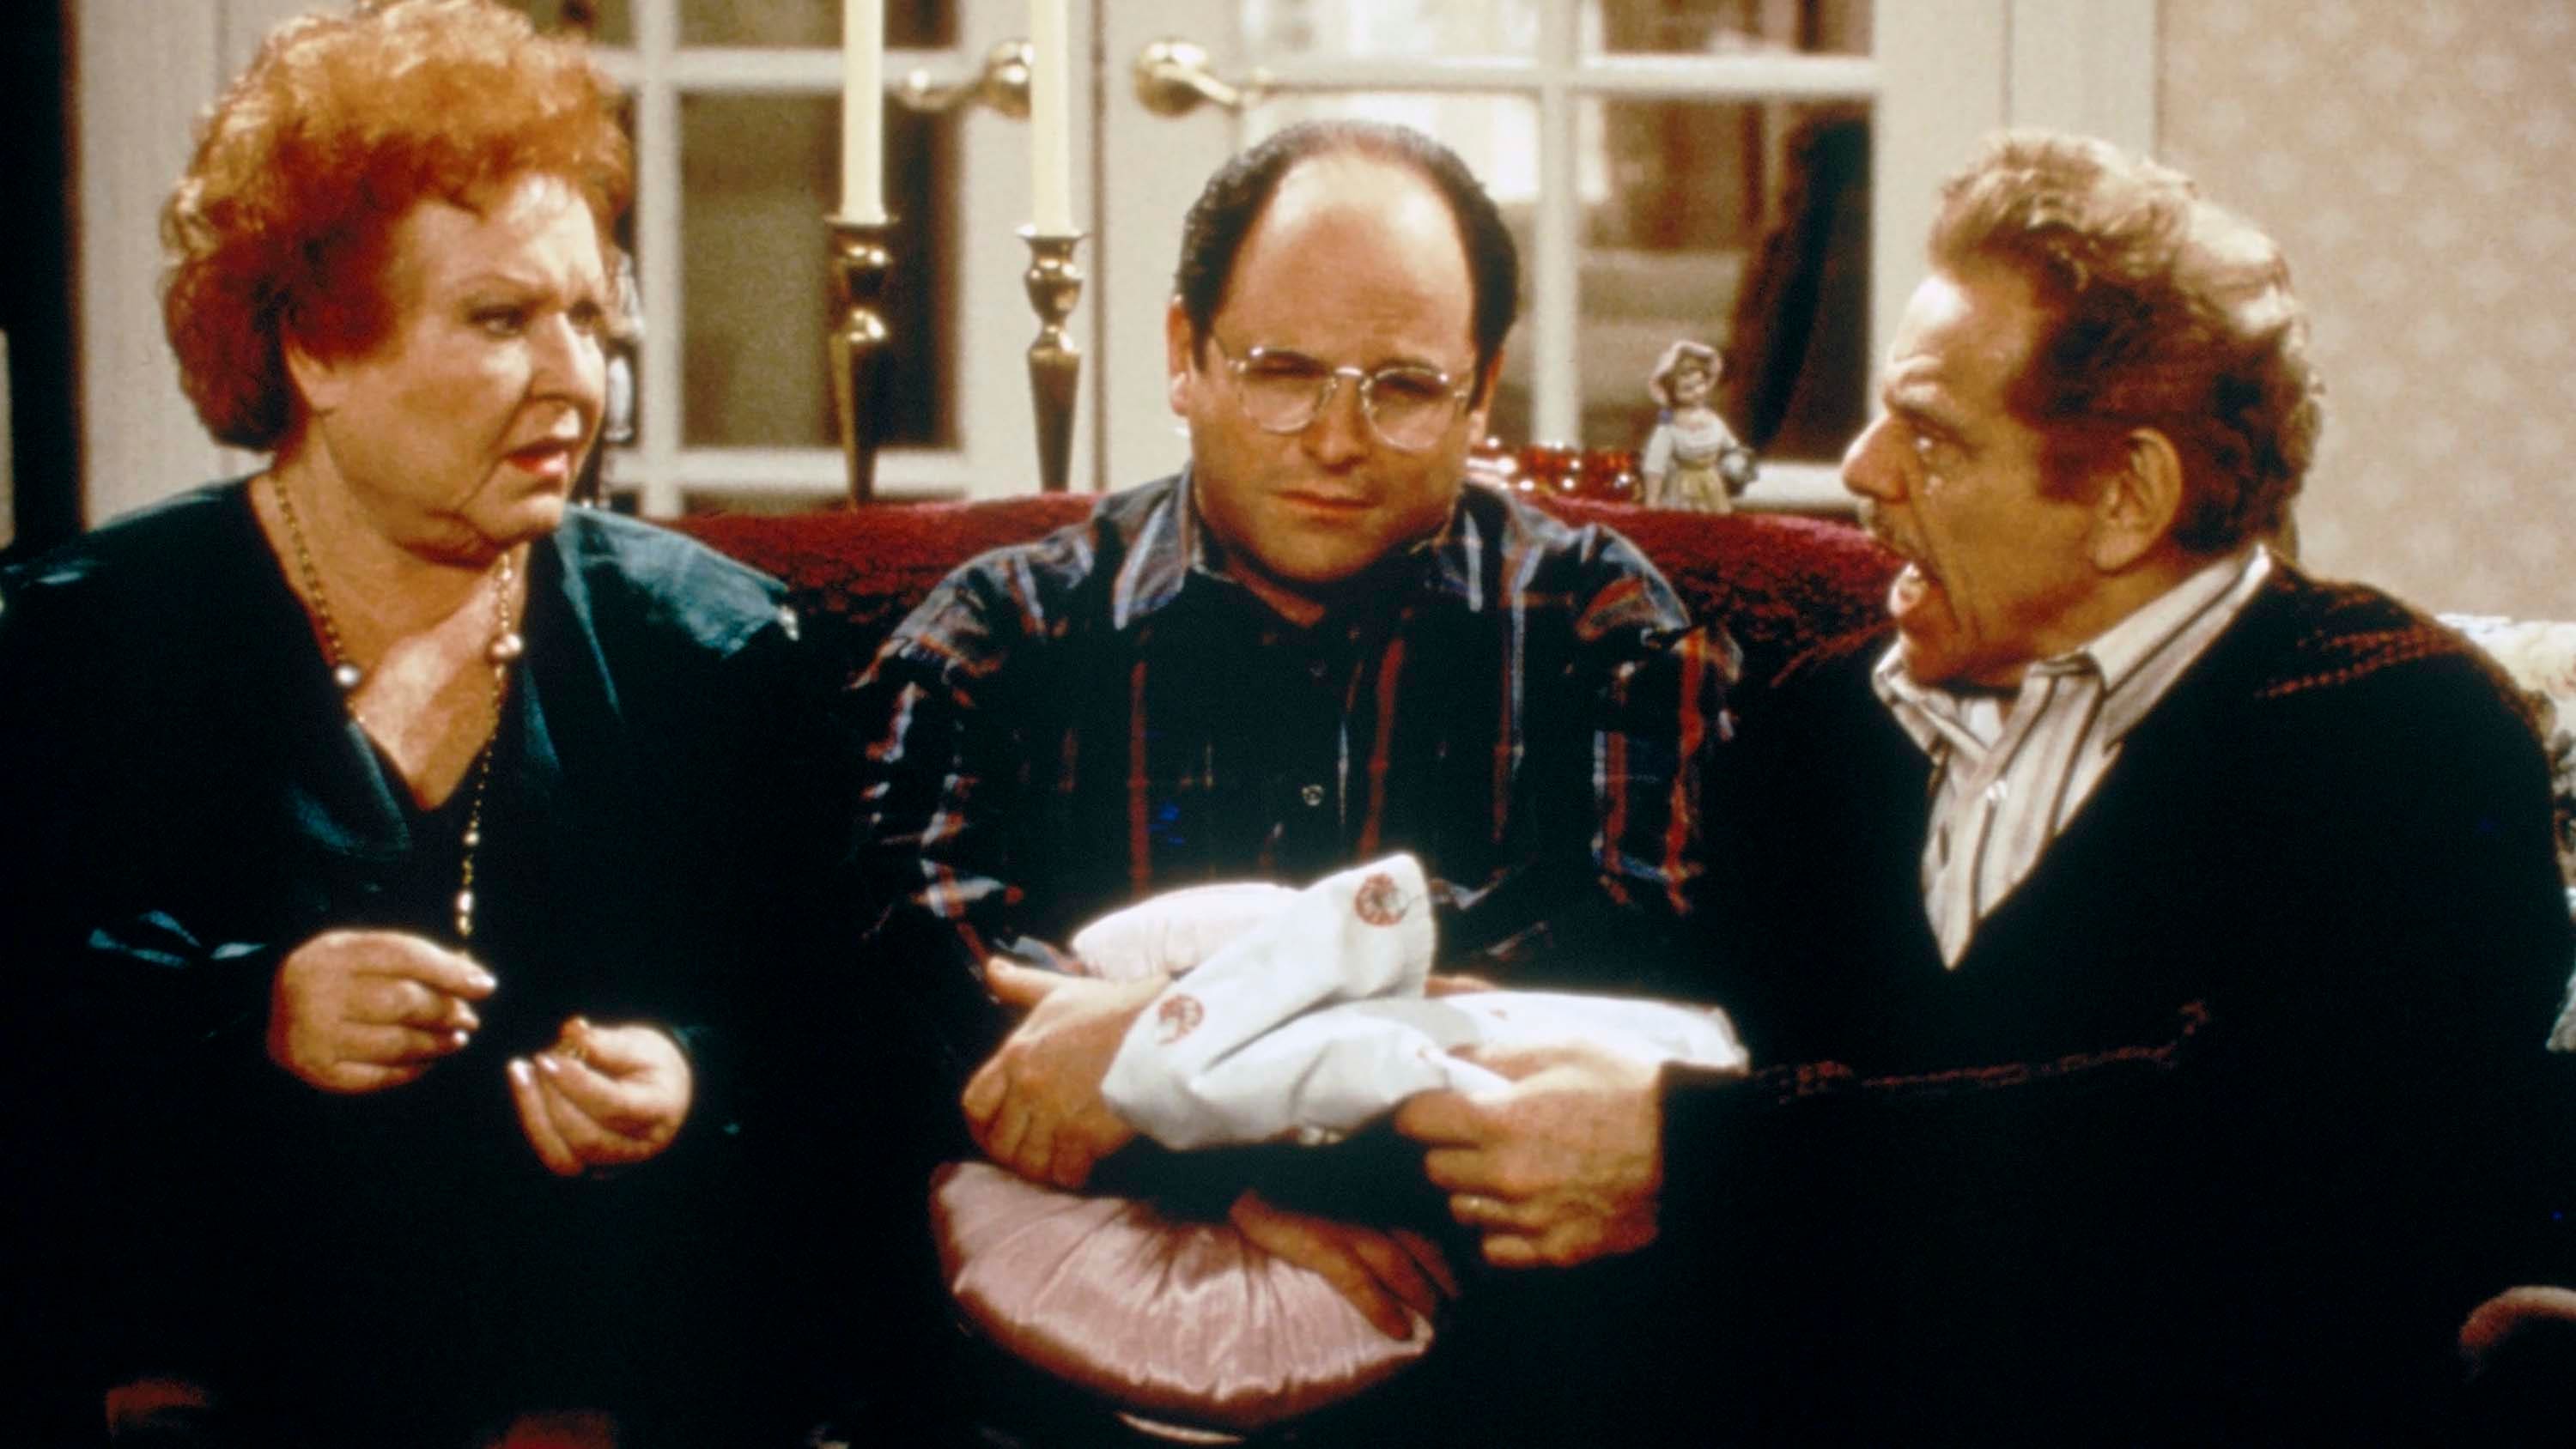 ‘Seinfeld’ holiday festivus is for everyone this year